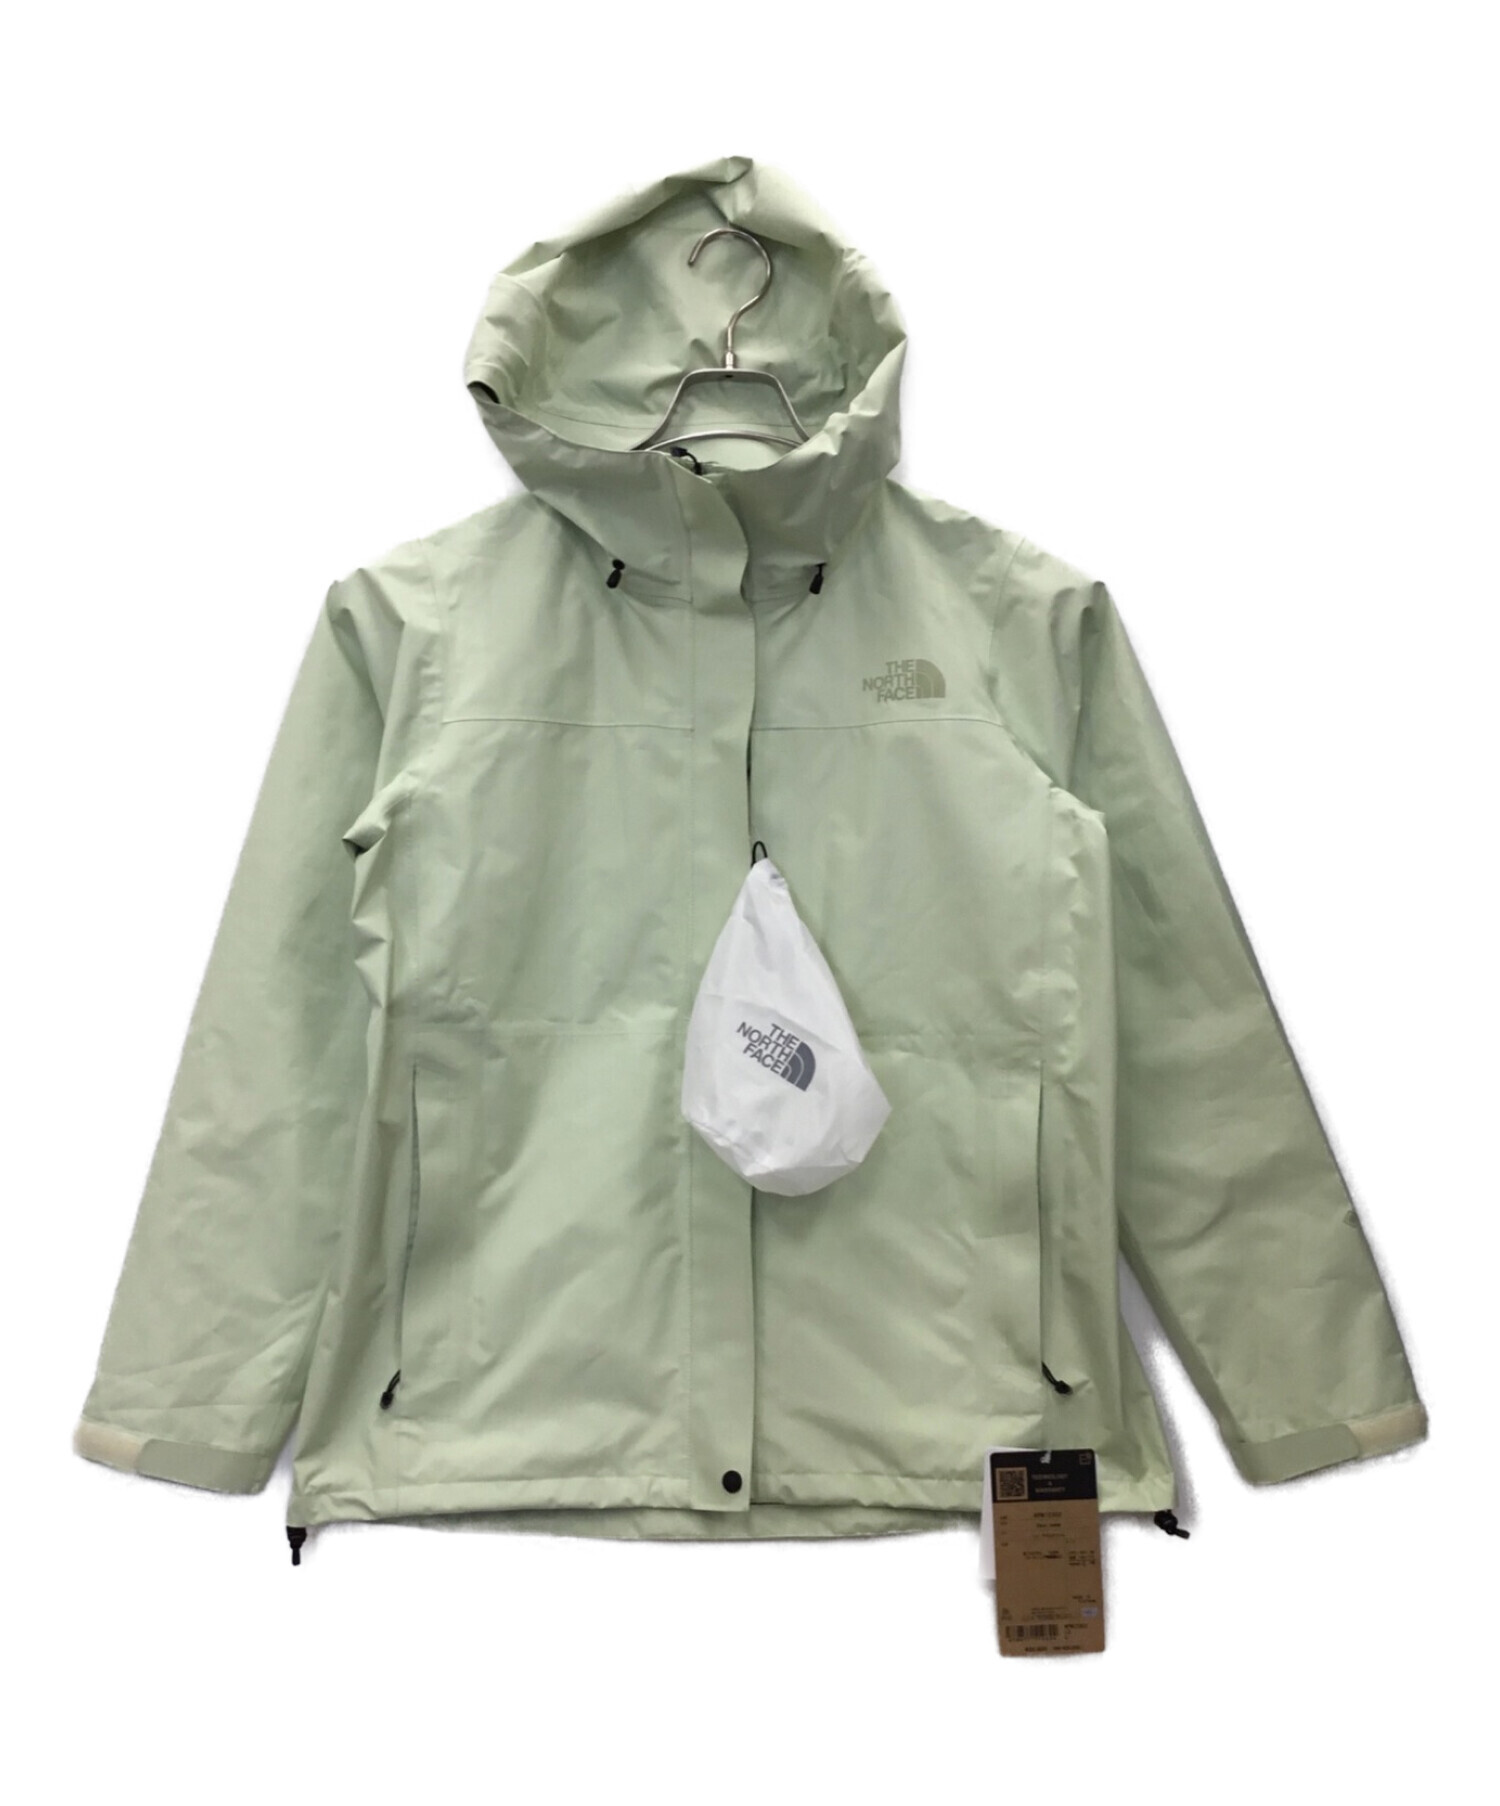 THE NORTH FACE CLOUD JACKET